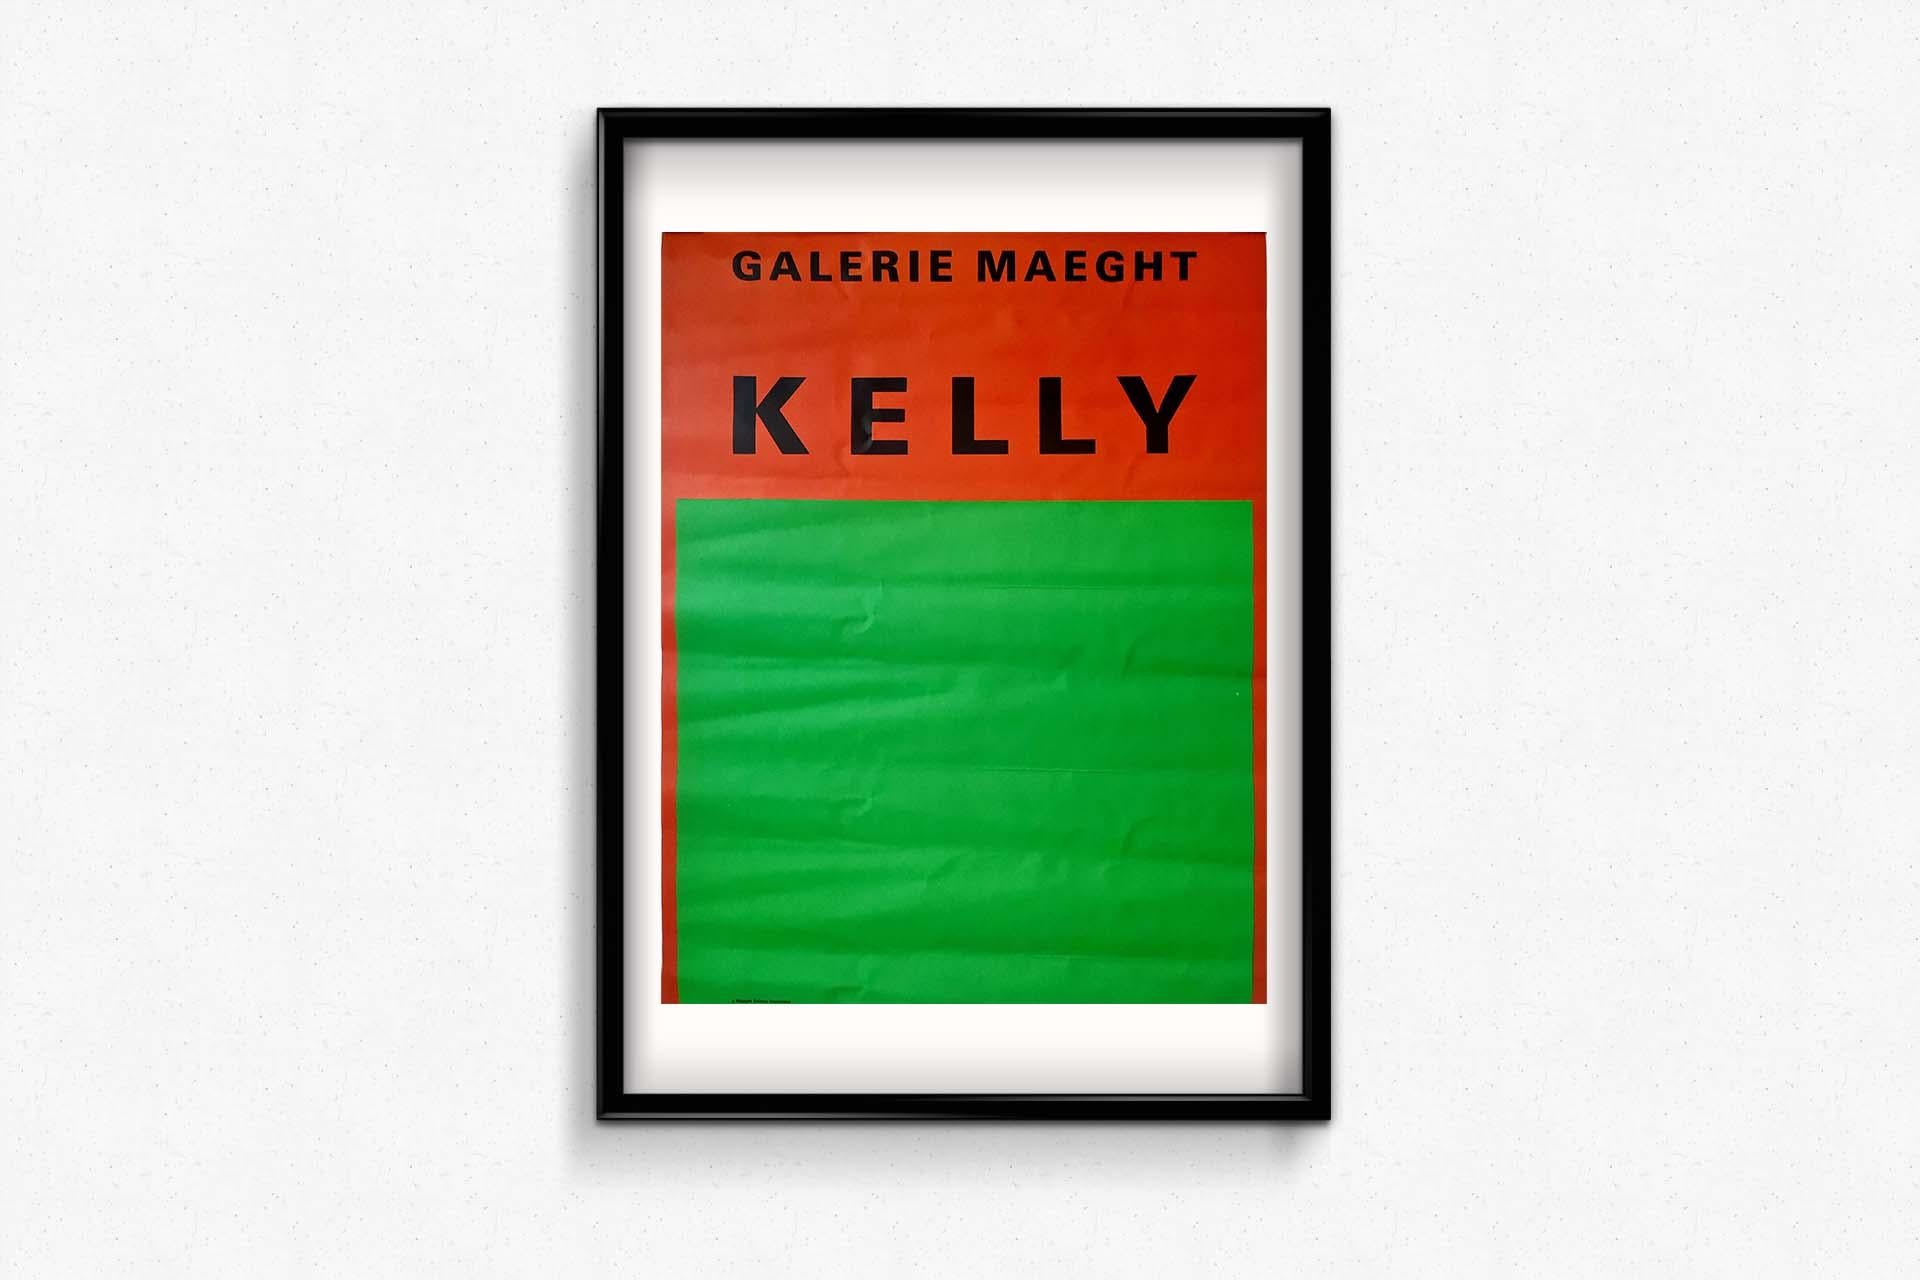 1964 original poster by Ellsworth Kelly for an exhibition at the Maeght Gallery For Sale 1